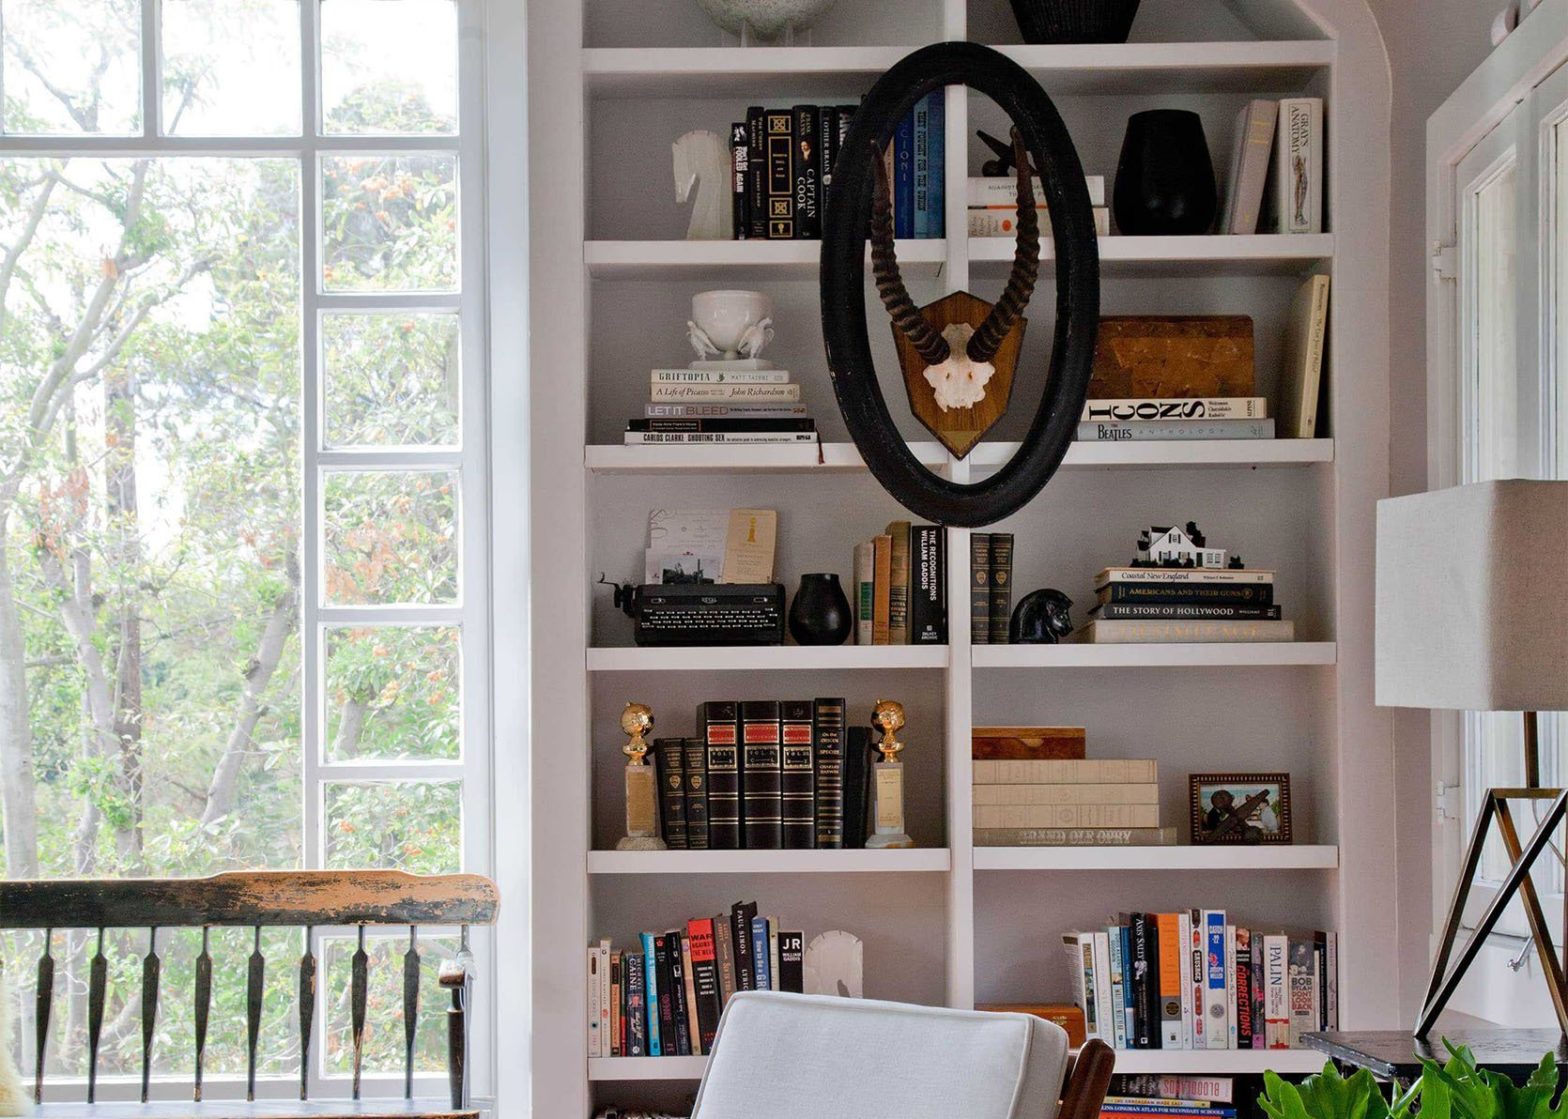 Stylist Hack: 7 Unexpected Places I Like To Hang Art (To Make Your House Look Unique)